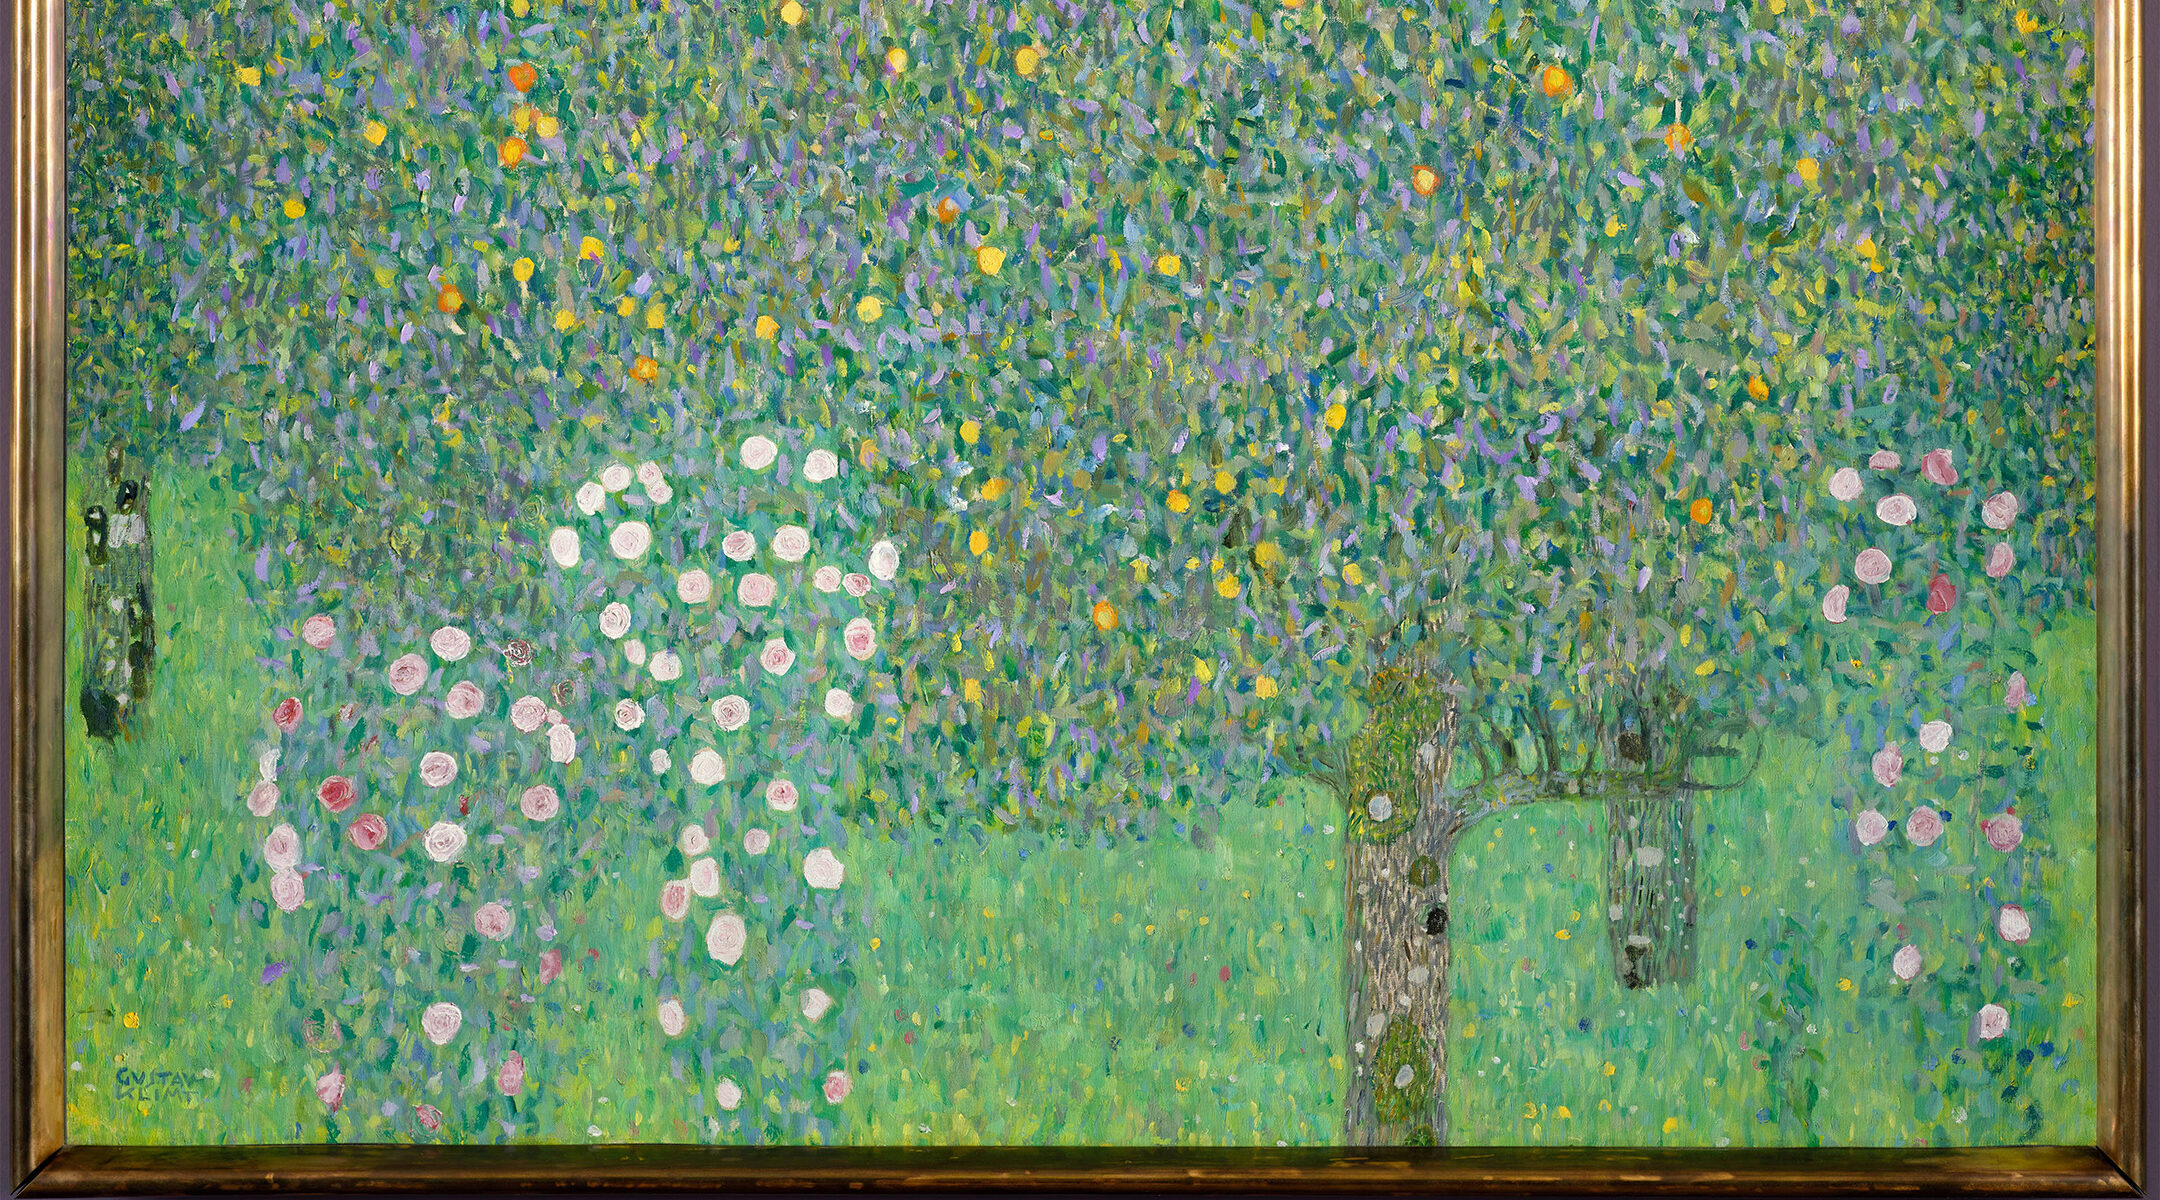 The painting "Rosebushes under the Trees" by Gustav Klimt hangs at the Musée d'Orsay museum in Paris, March 15, 2021. (Courtesy of the French Culture Ministry)